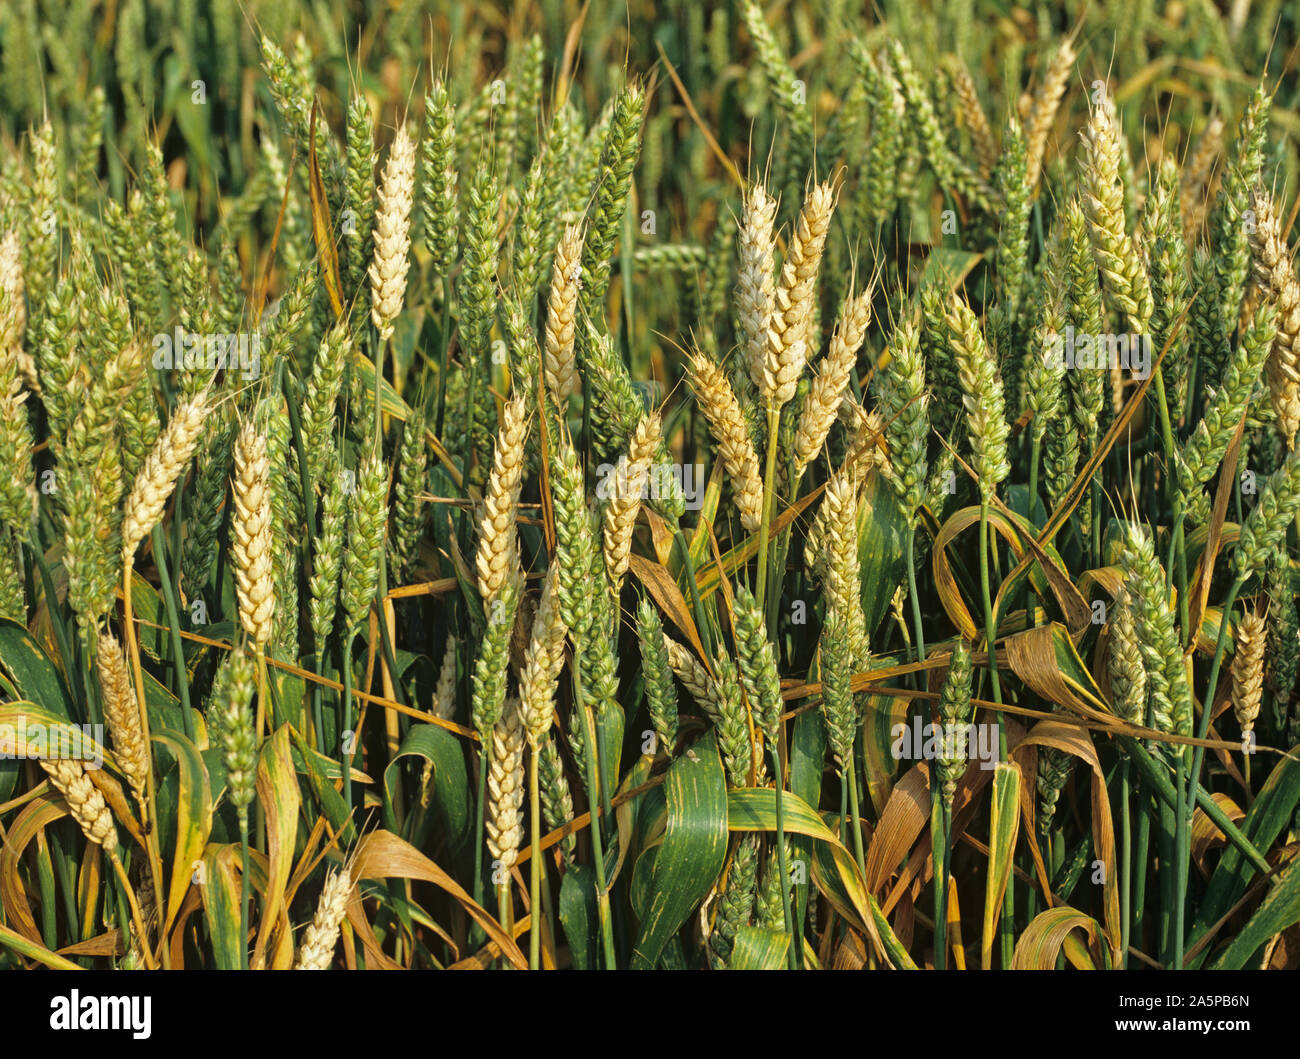 Typical symptom of blank ears or whiteheads caused by root and stem diseases in a wheat crop, premature ripening Stock Photo